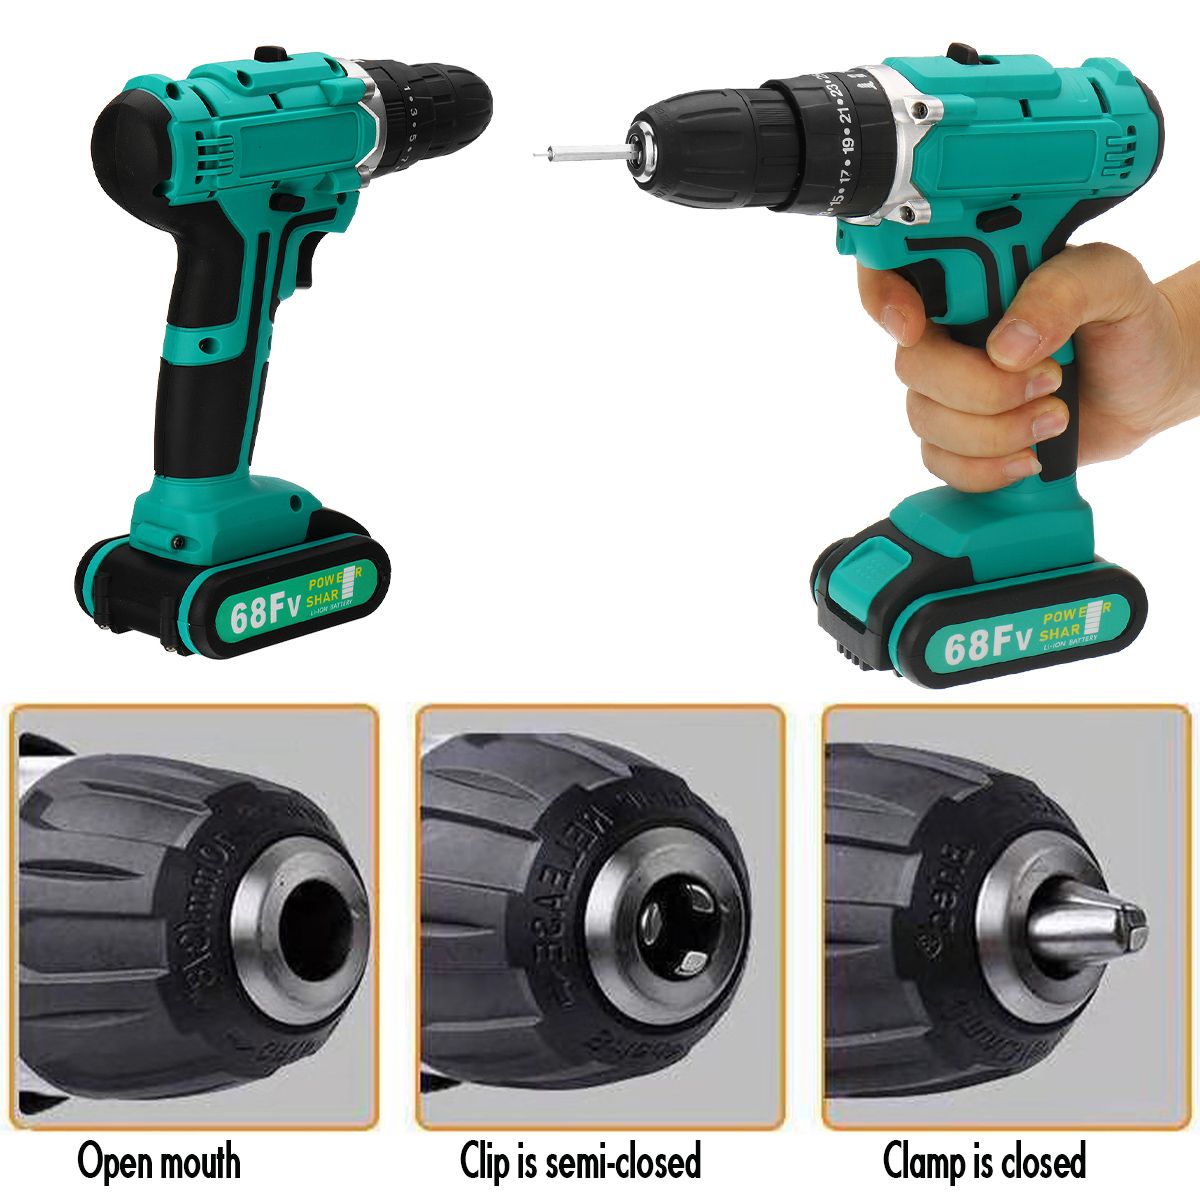 68FV-Household-Lithium-Electric-Screwdriver-2-Speed-Impact-Power-Drills-Rechargeable-Drill-Driver-W--1560586